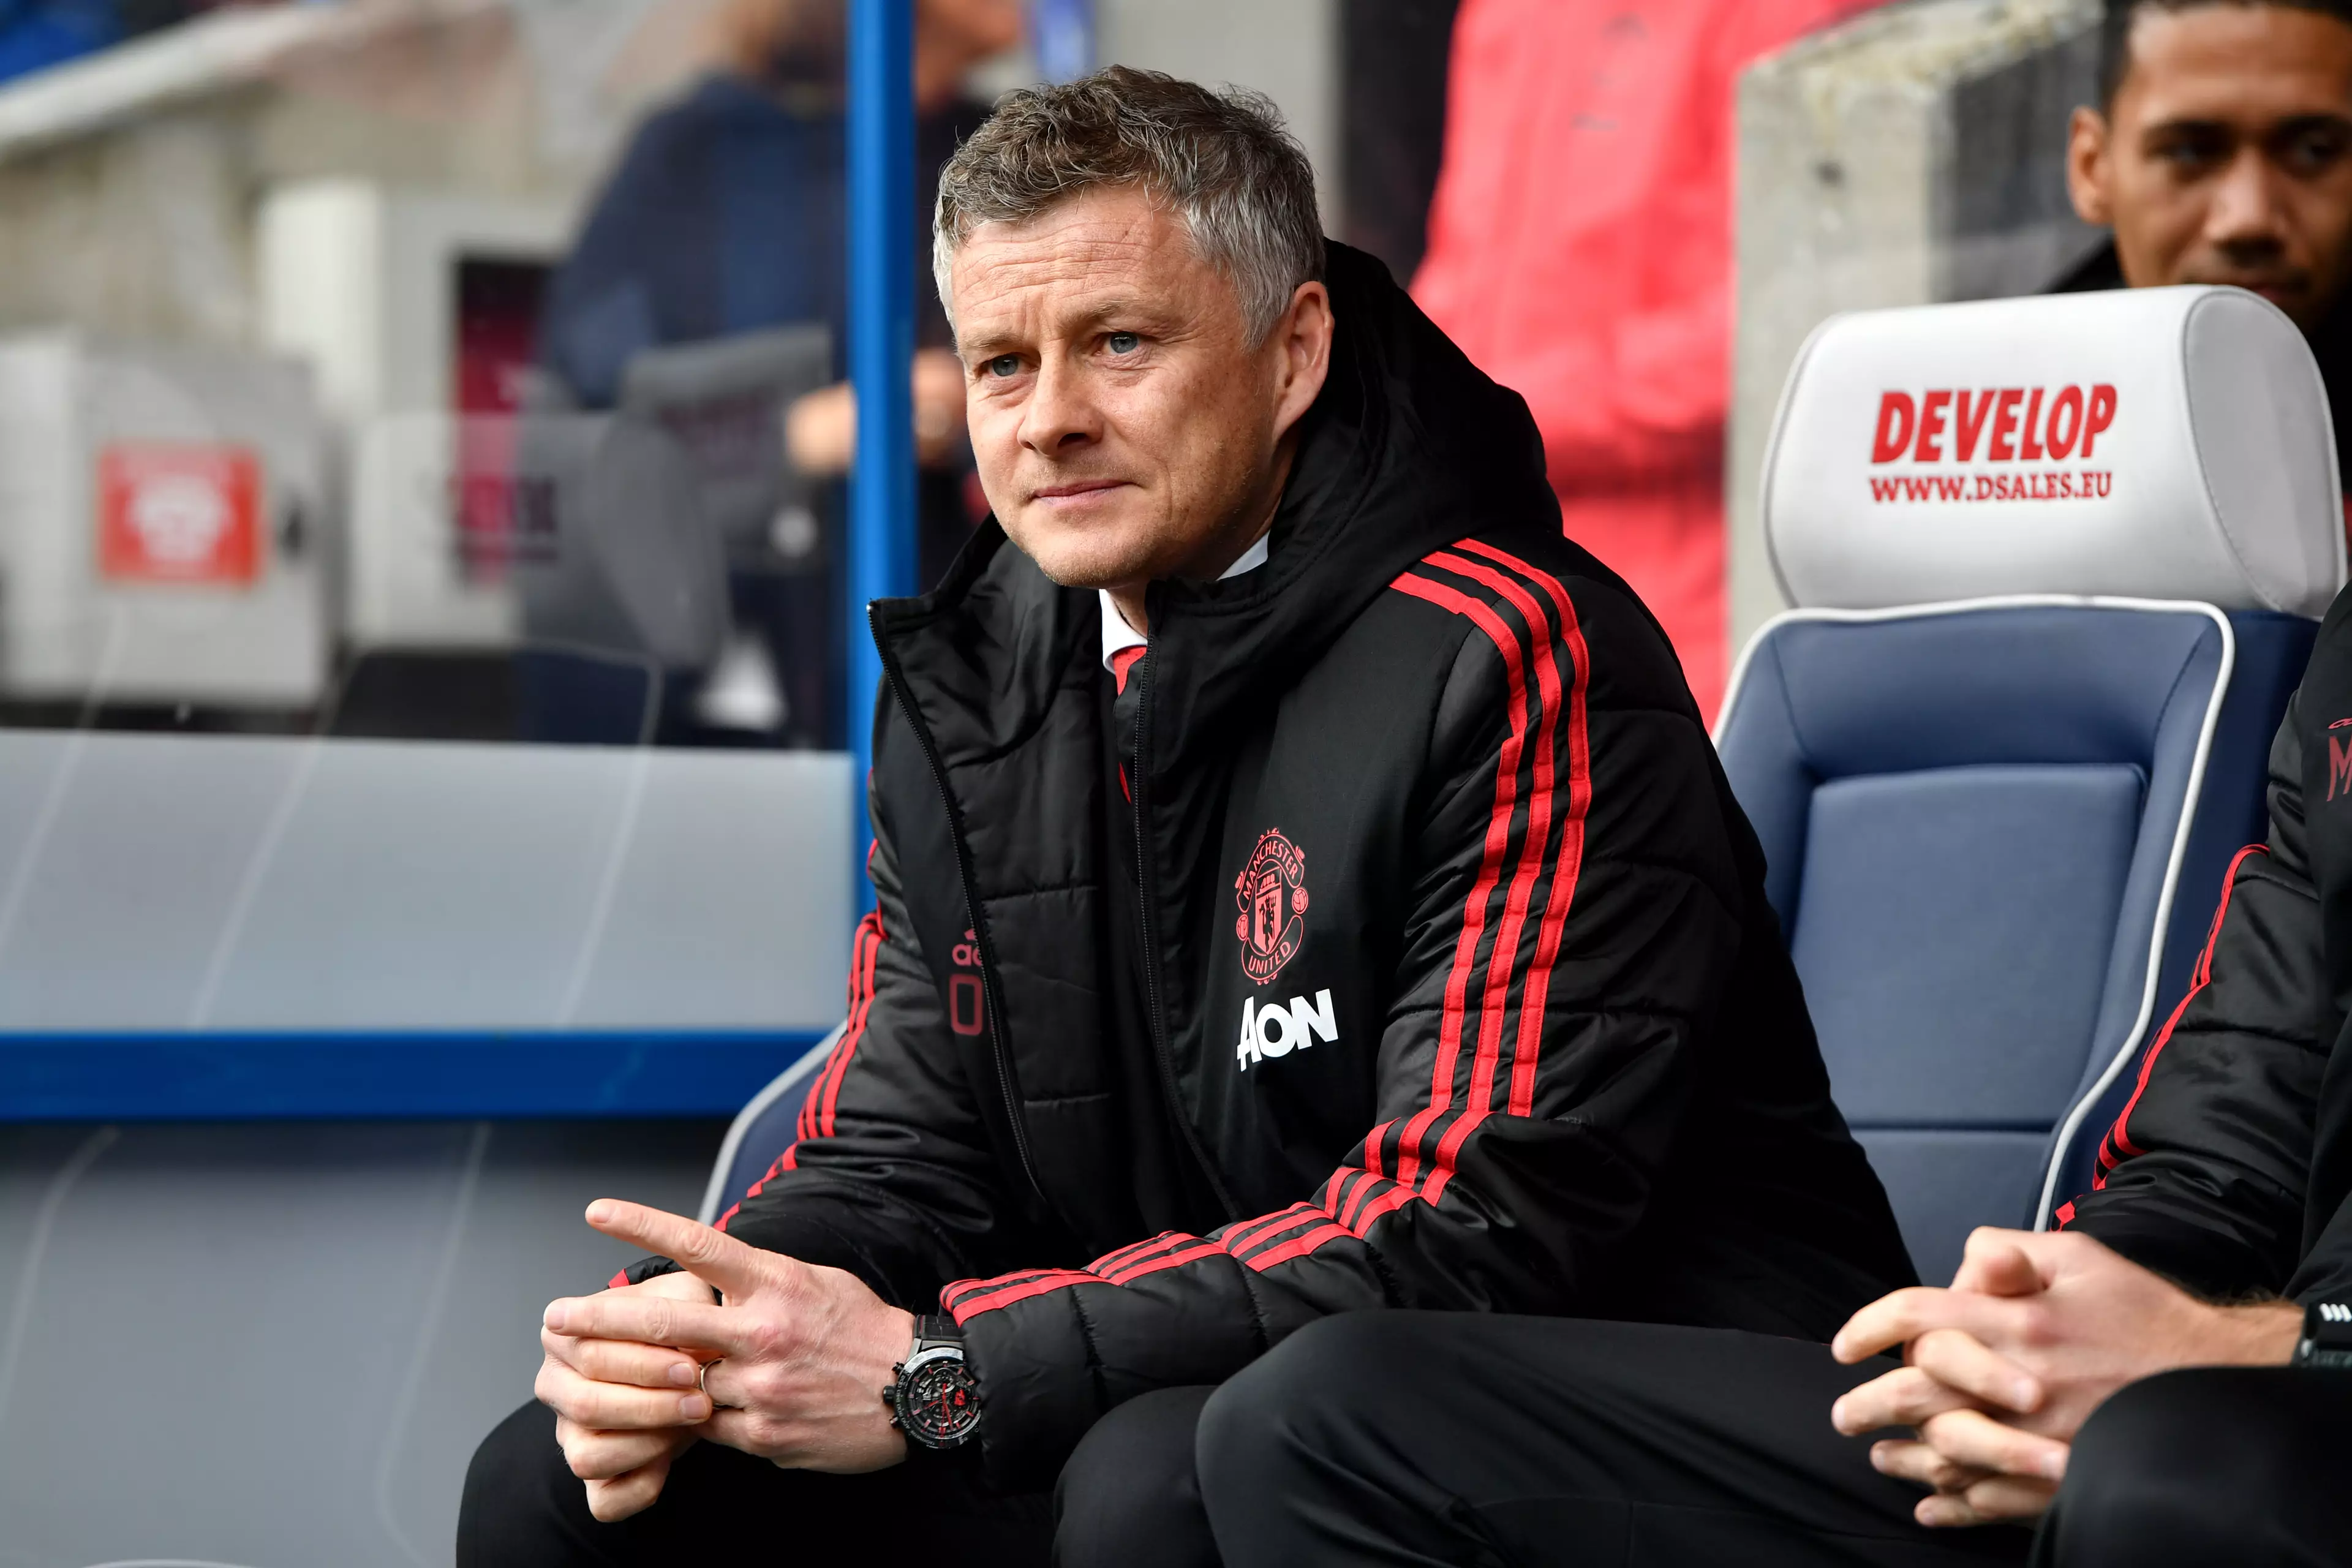 Solskjaer suffered from second half of first season syndrome. Image: PA Images